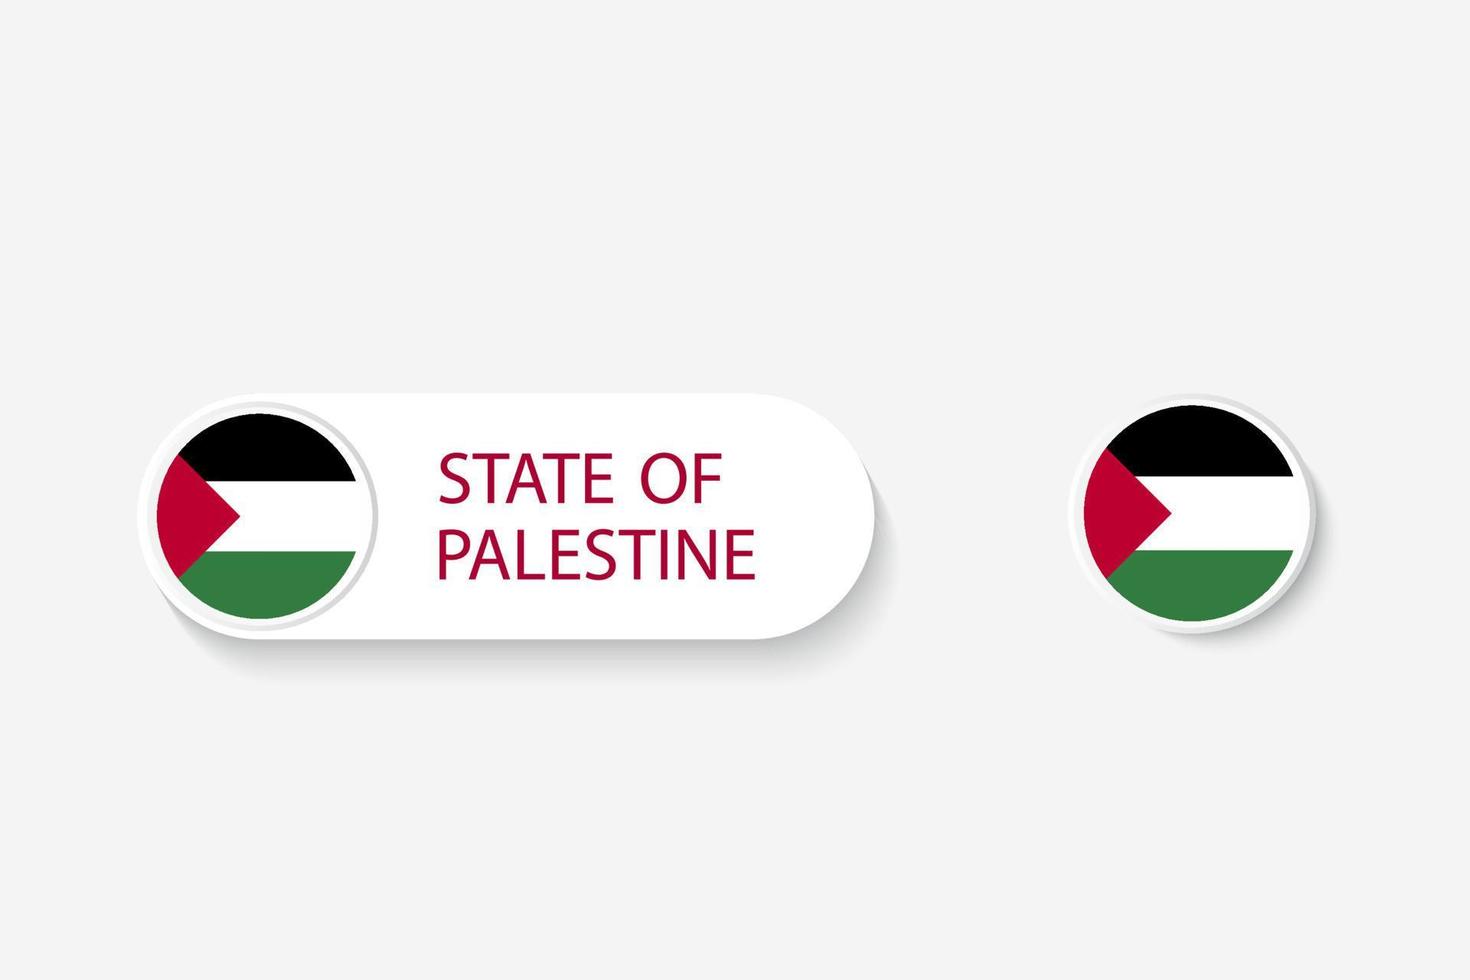 State of Palestine button flag in illustration of oval shaped with word of State of Palestine. And button flag State of Palestine. vector